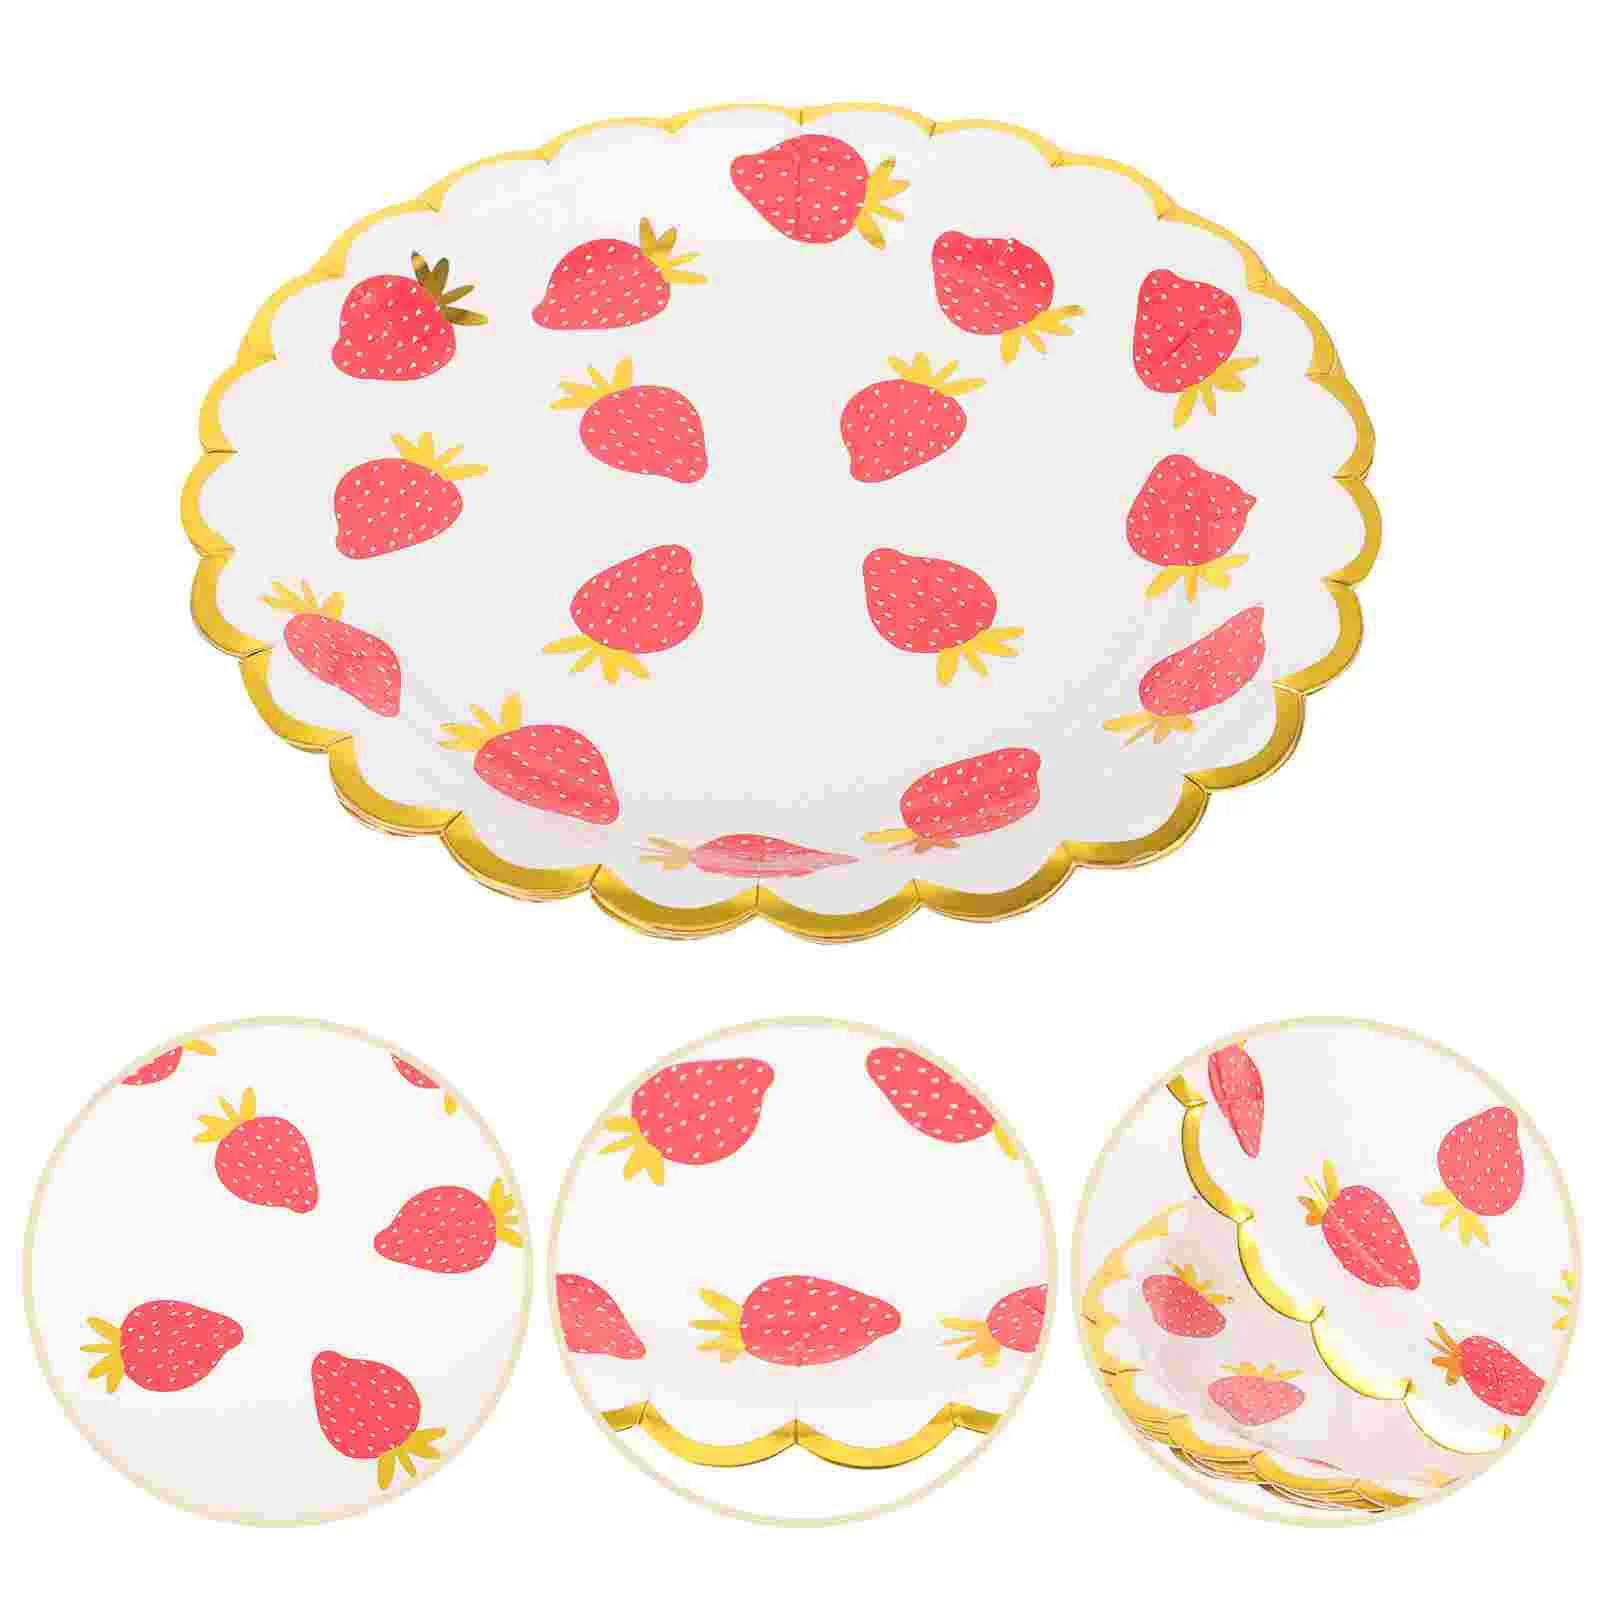 

24 Pcs Strawberry Paper Plate Party Cake Plates Theme Decorations Disposable Dishes Tableware Dinnerware Food Props